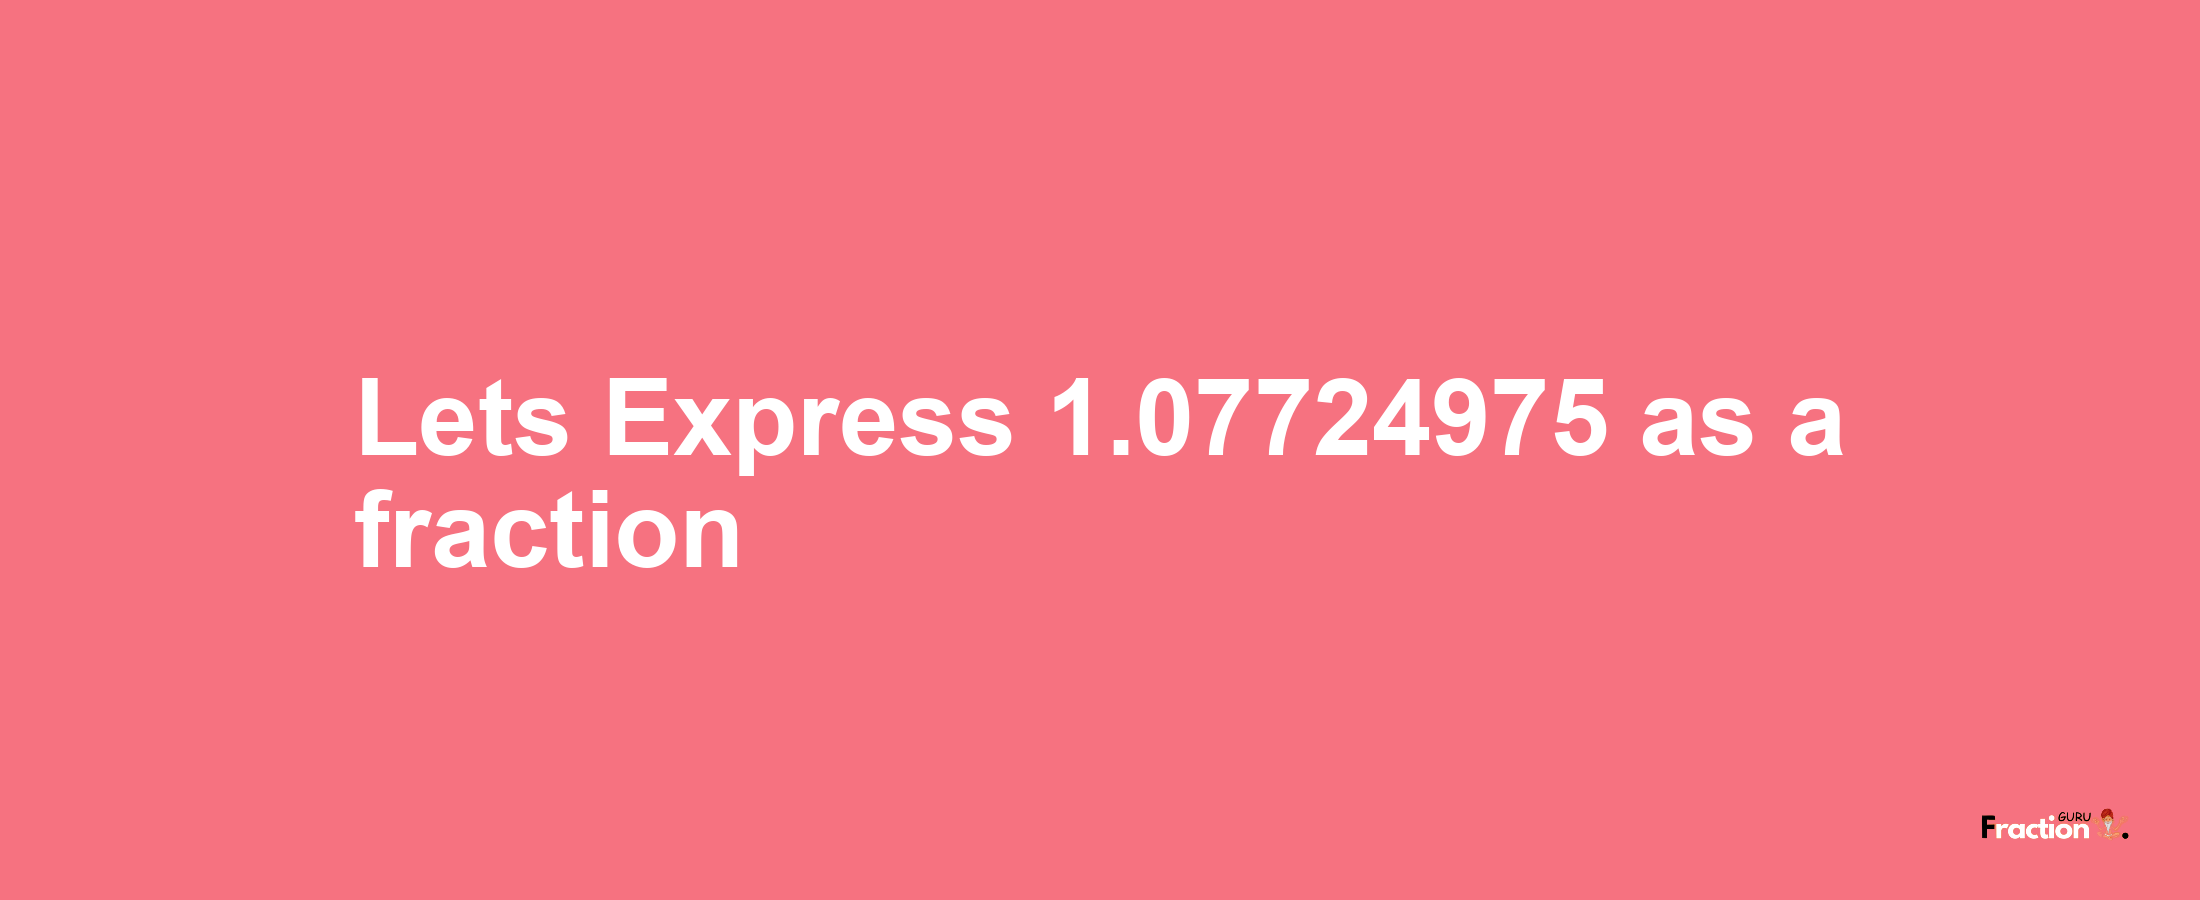 Lets Express 1.07724975 as afraction